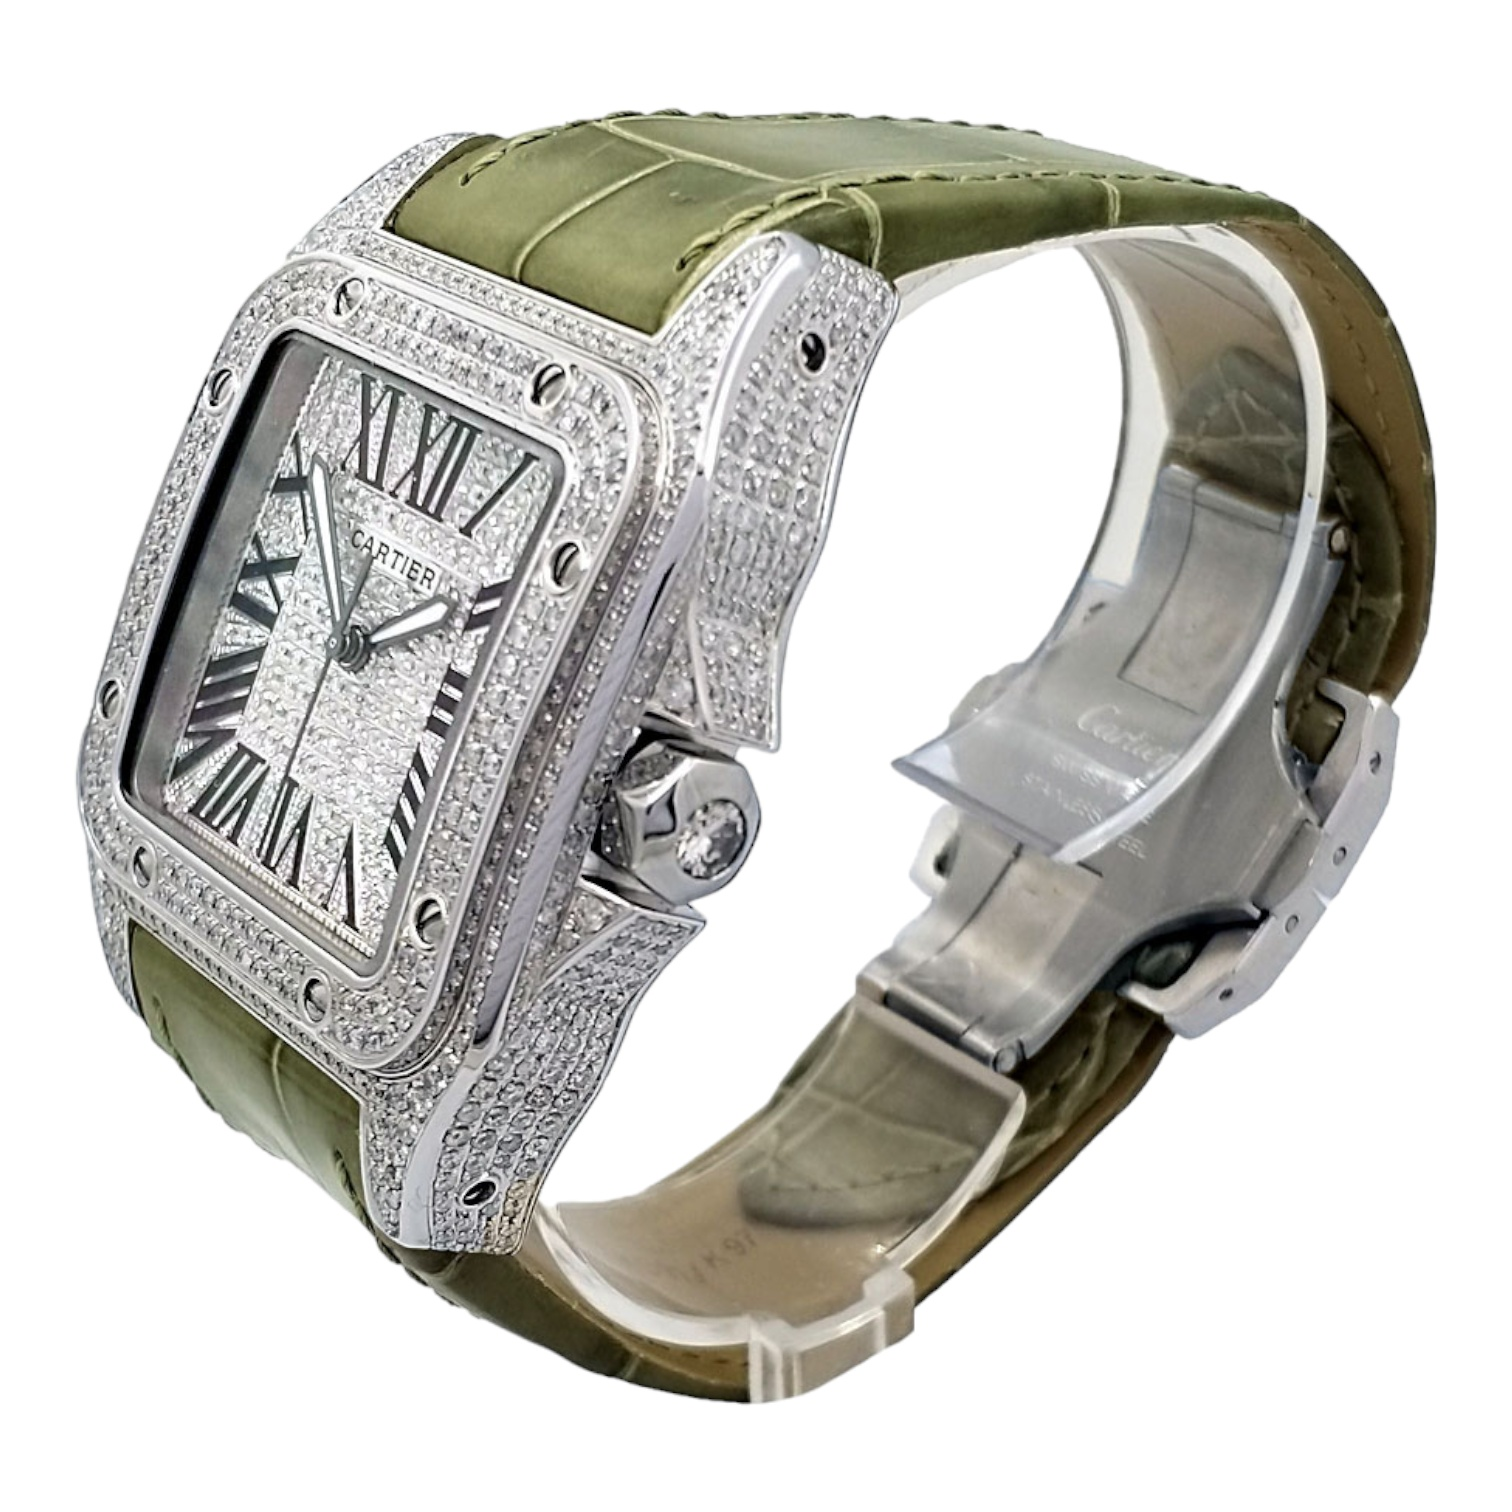 Cartier Santos 100 XL Iced Out diamonds setting Ref. 2656 - OU676 - LuxuryInStock